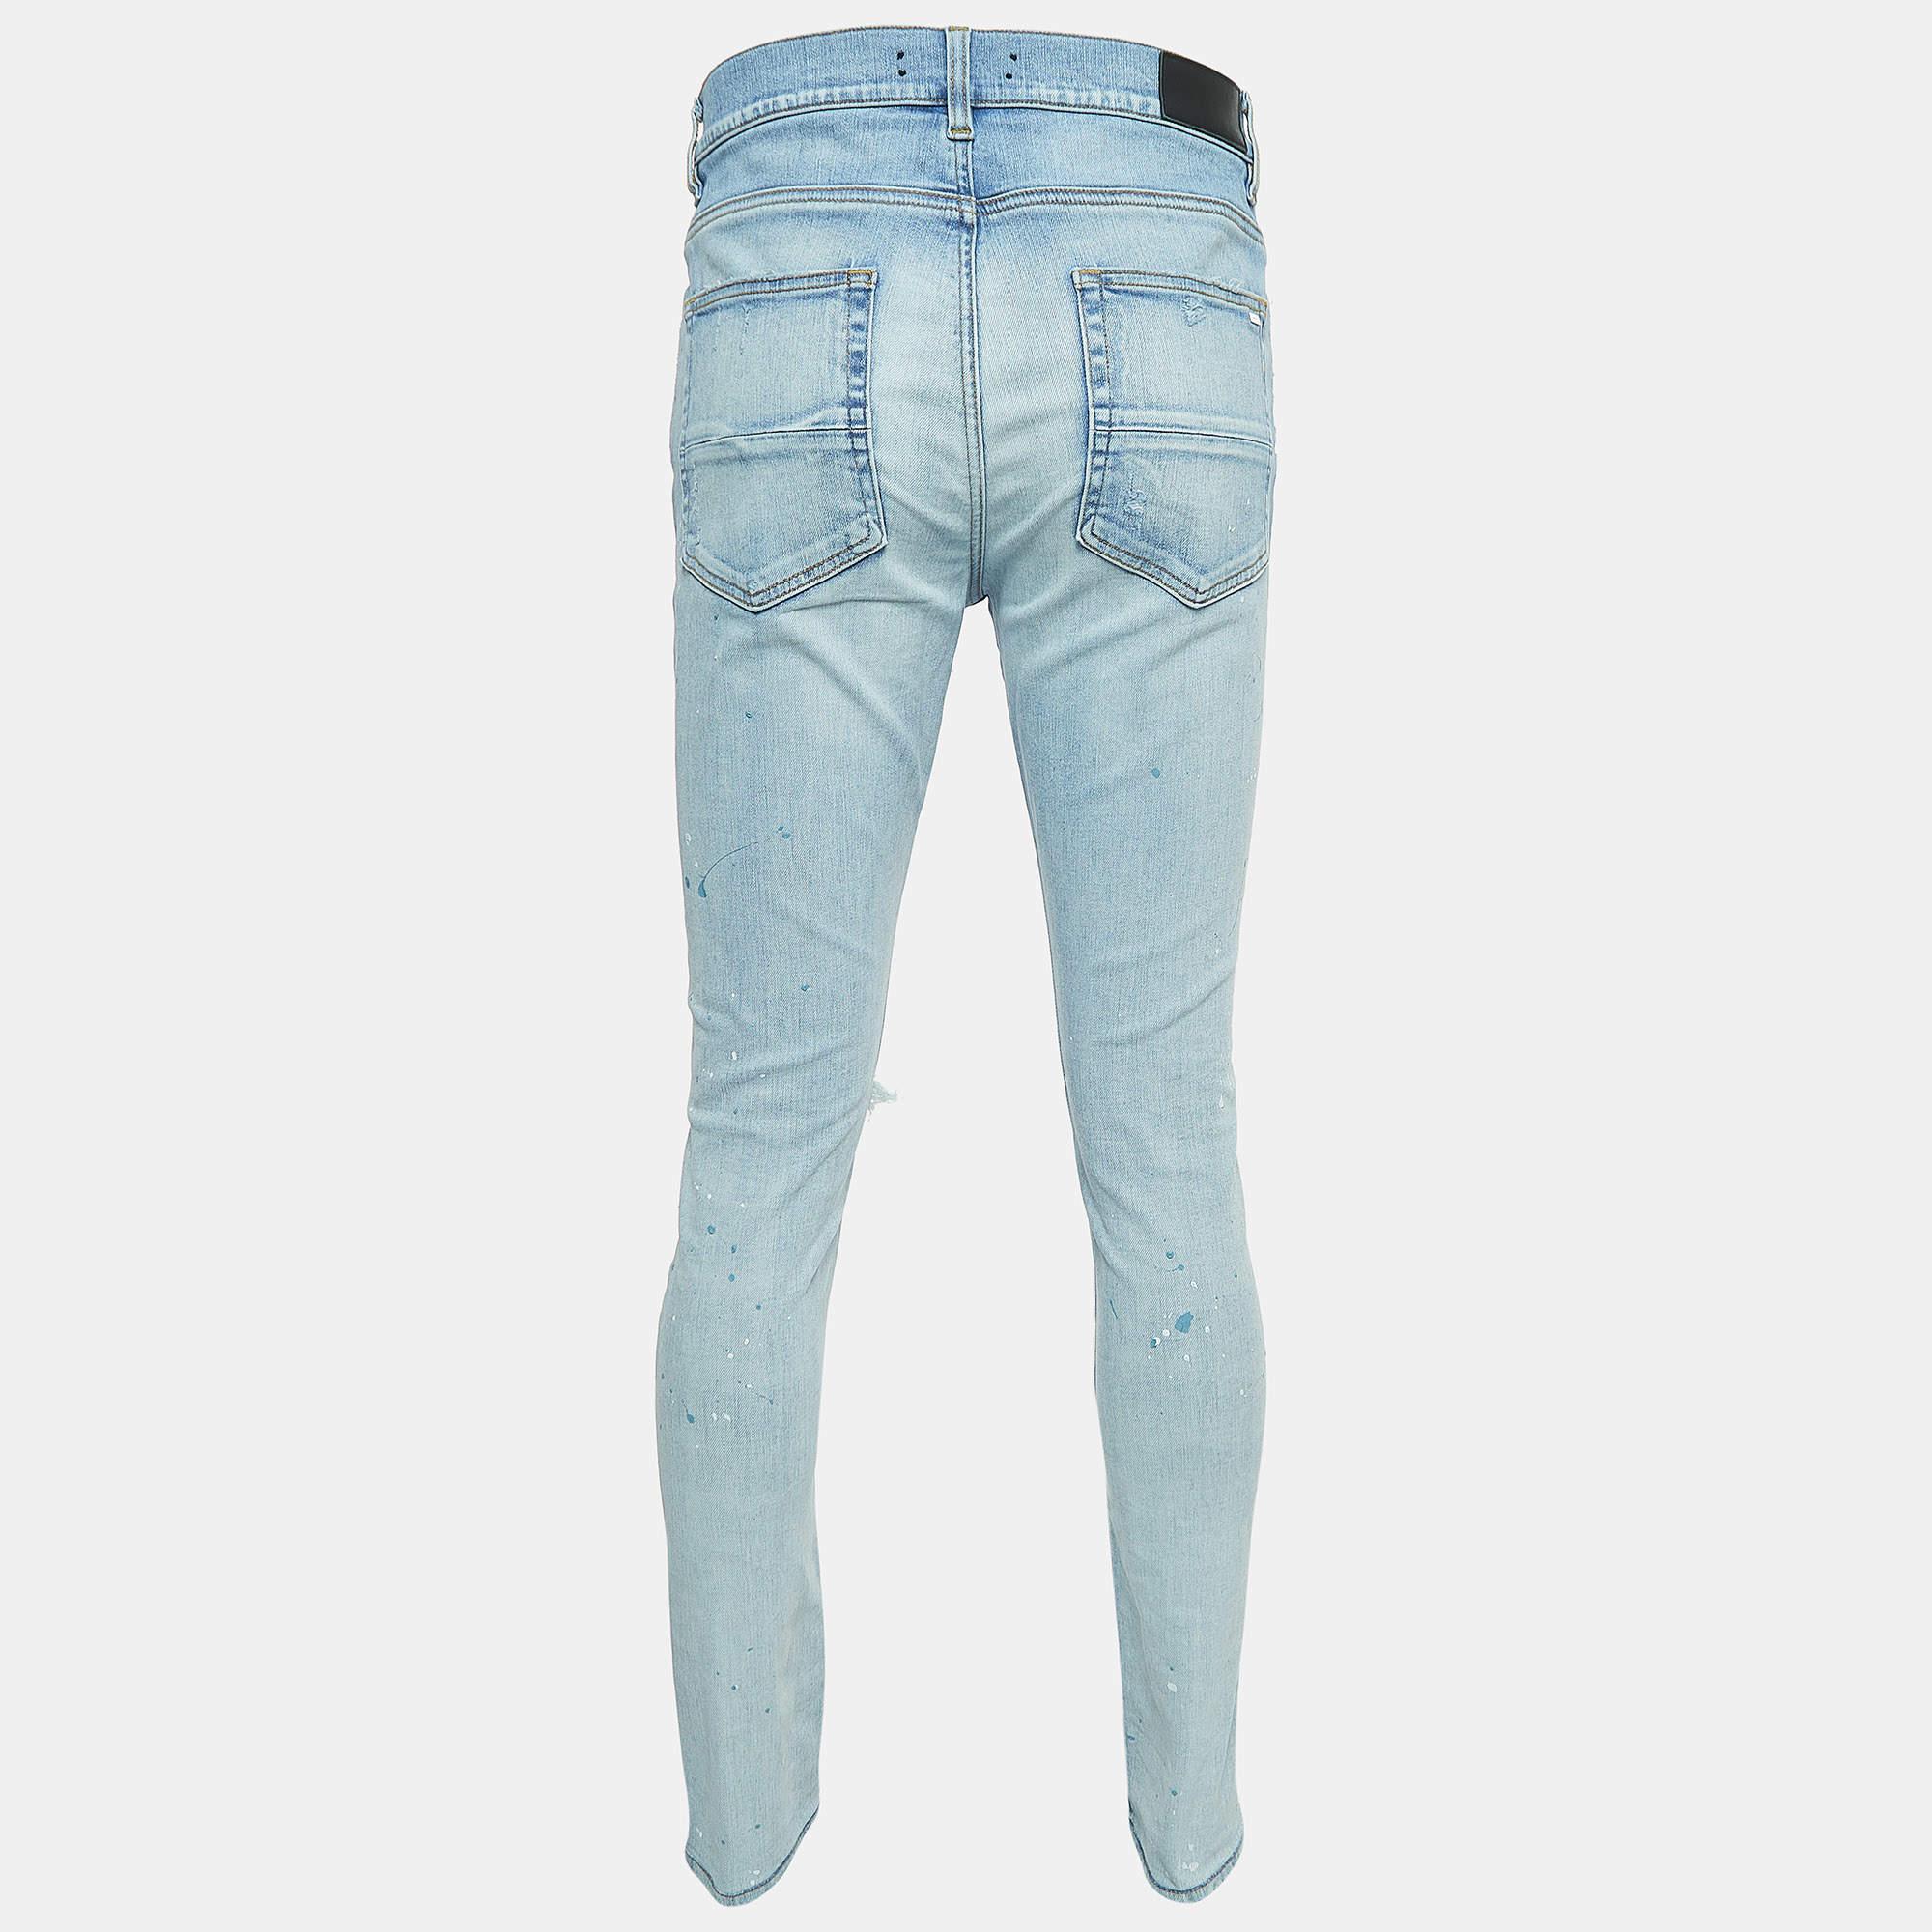 Pick these jeans from Amiri and feel absolutely stylish. They have been skillfully stitched using high-quality fabric and flaunt a superb fit. Pair these jeans with your favorite sneakers as you head out for the day.

